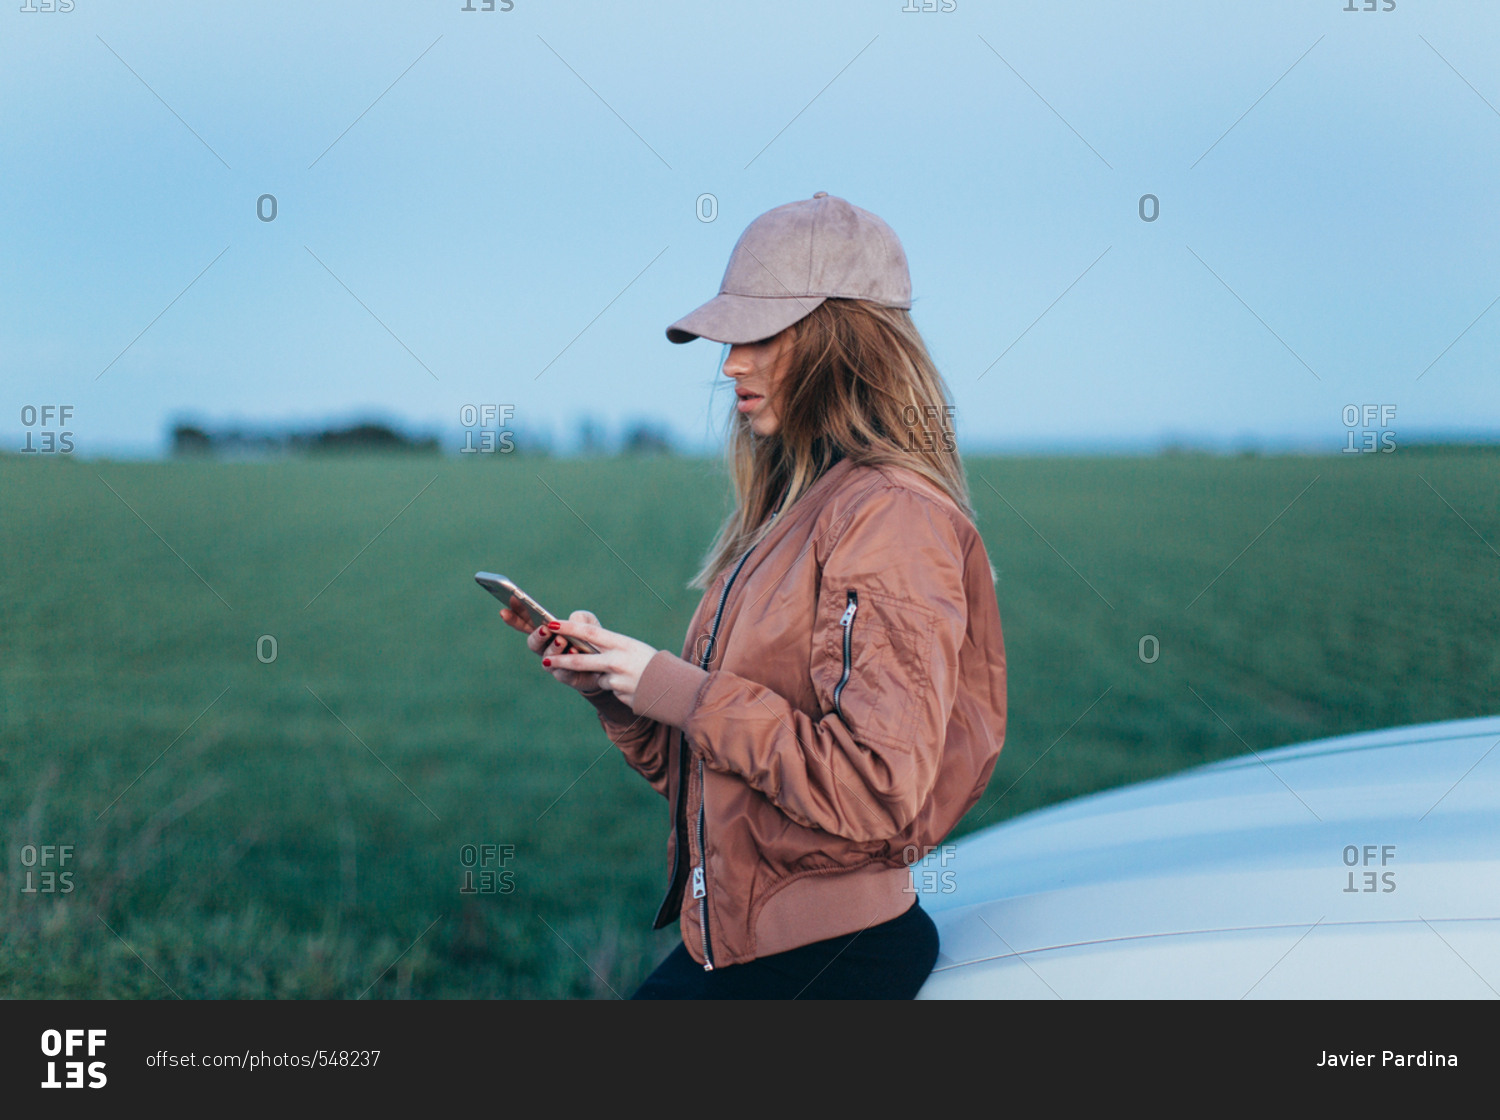 Young woman leaning against a car in the country checking her cellphone